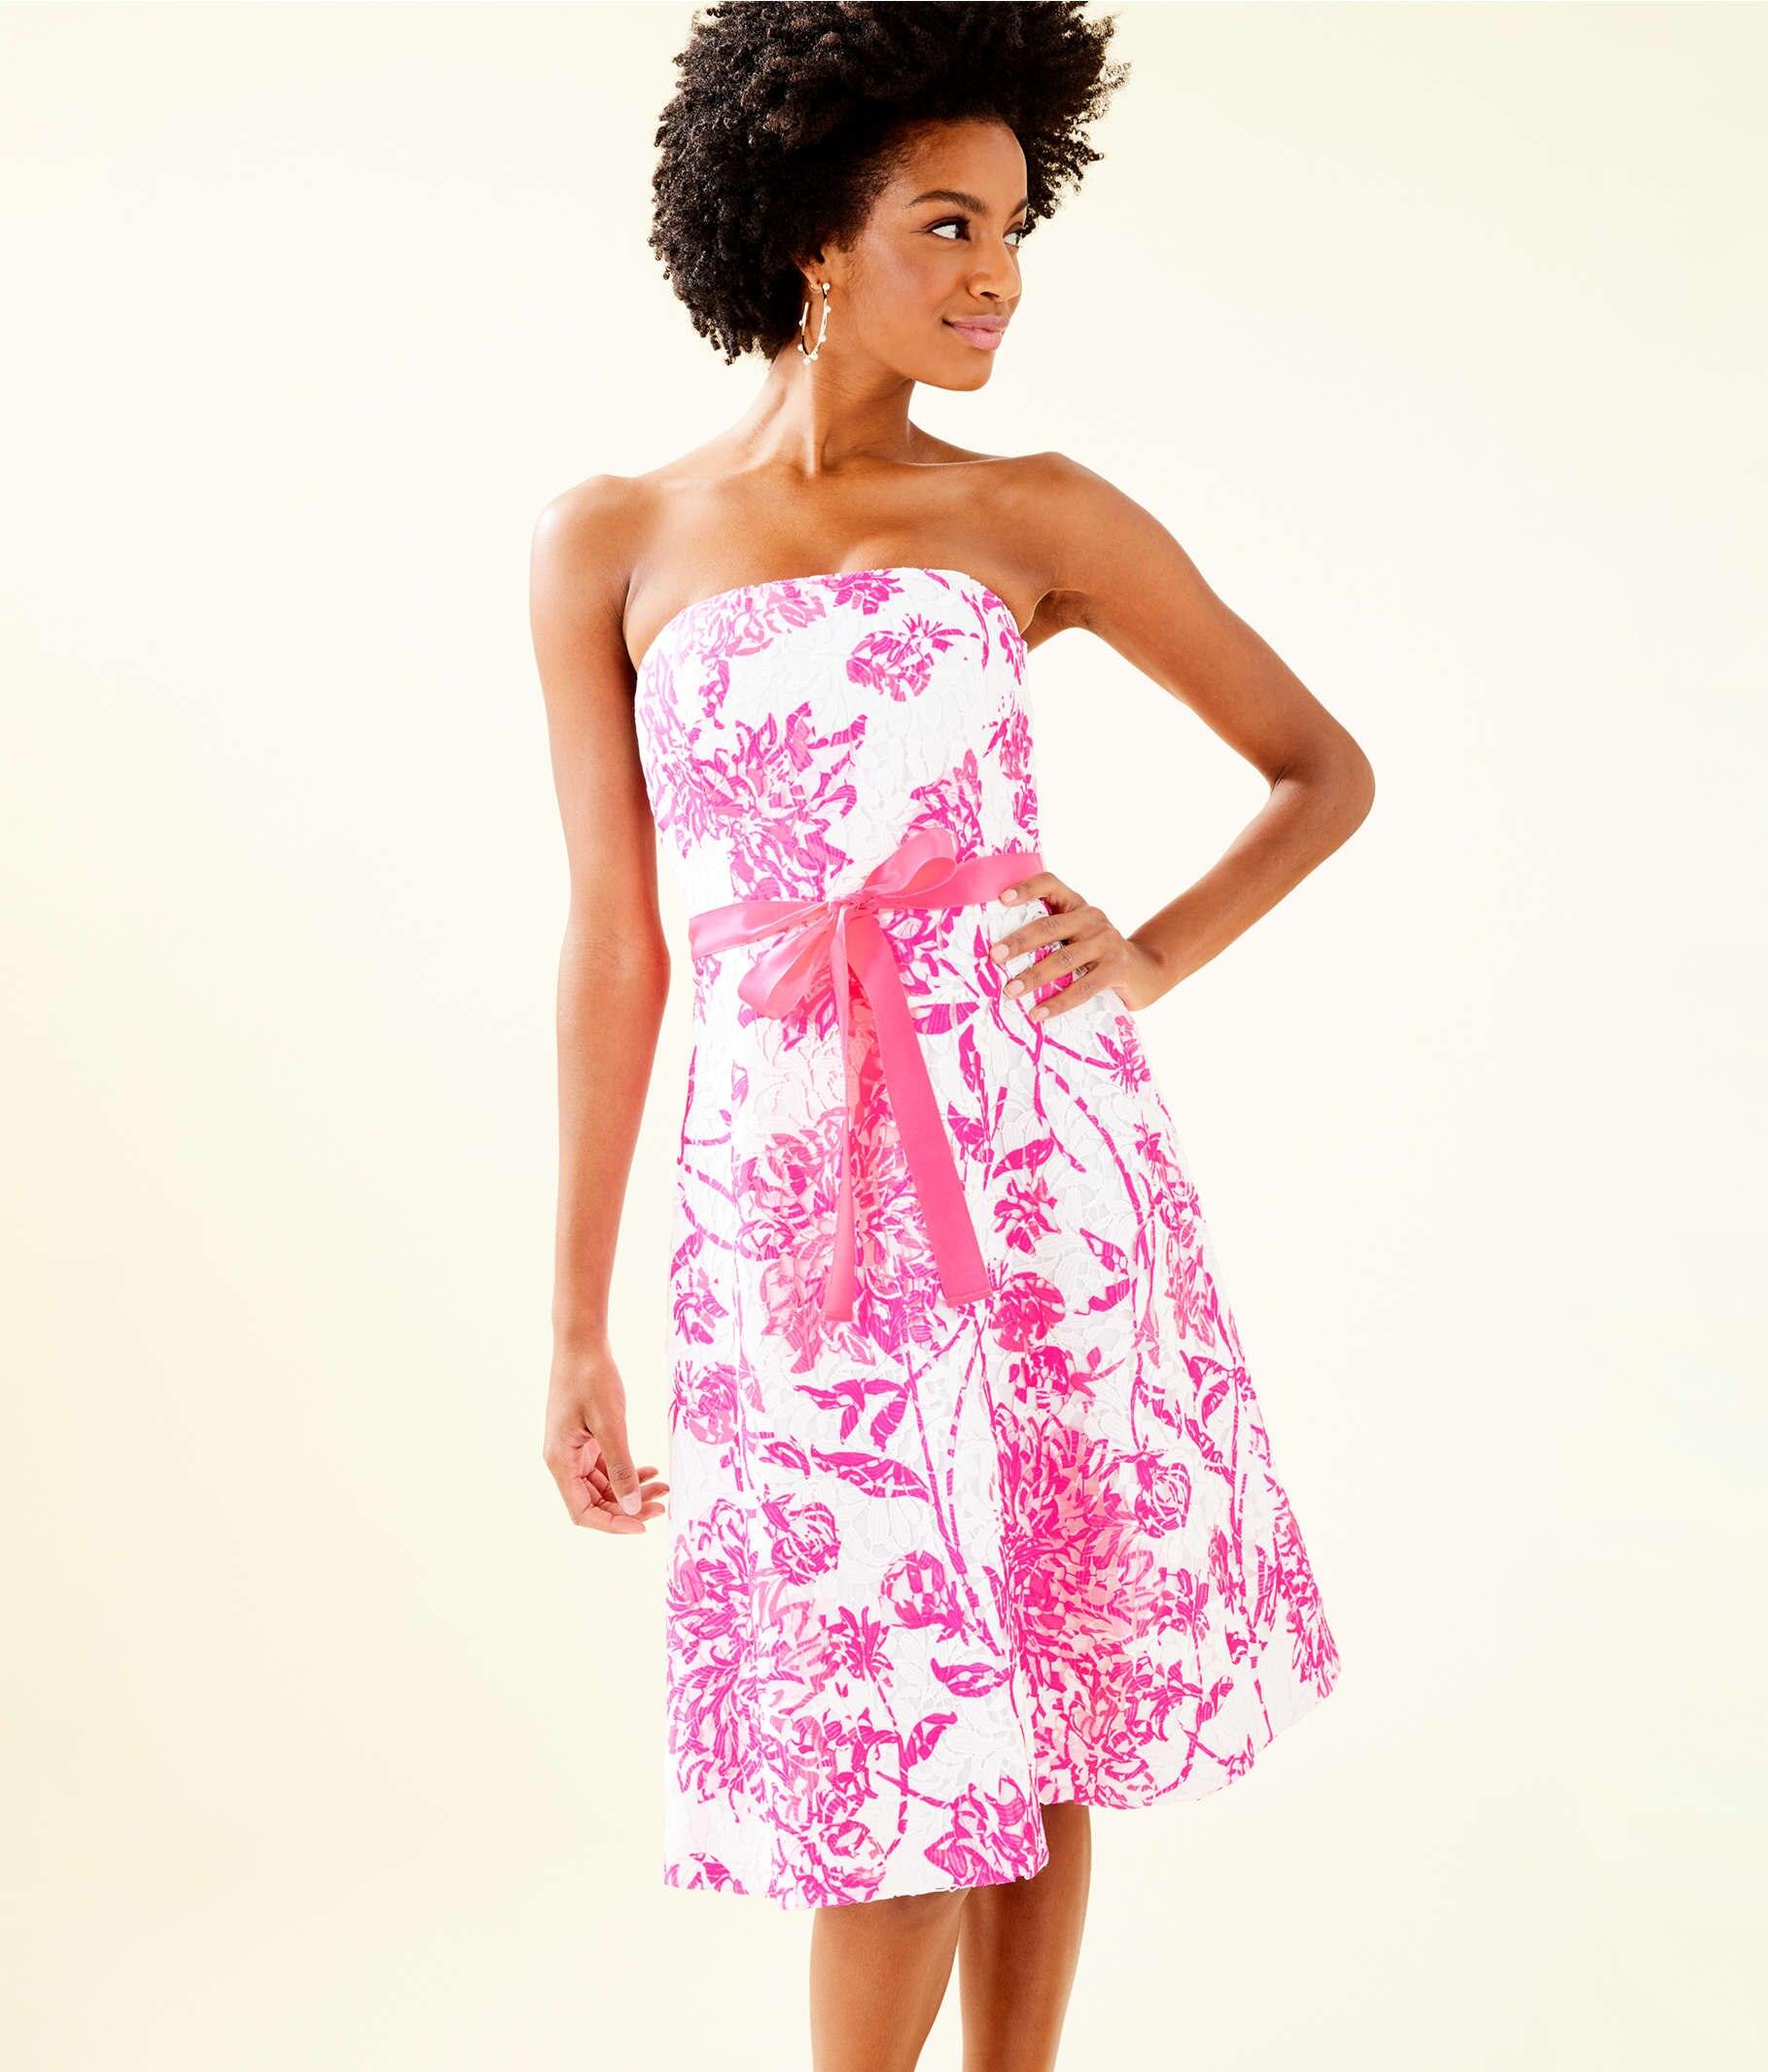 Lilly Pulitzer Lace Sienna Strapless Dress - Lyst